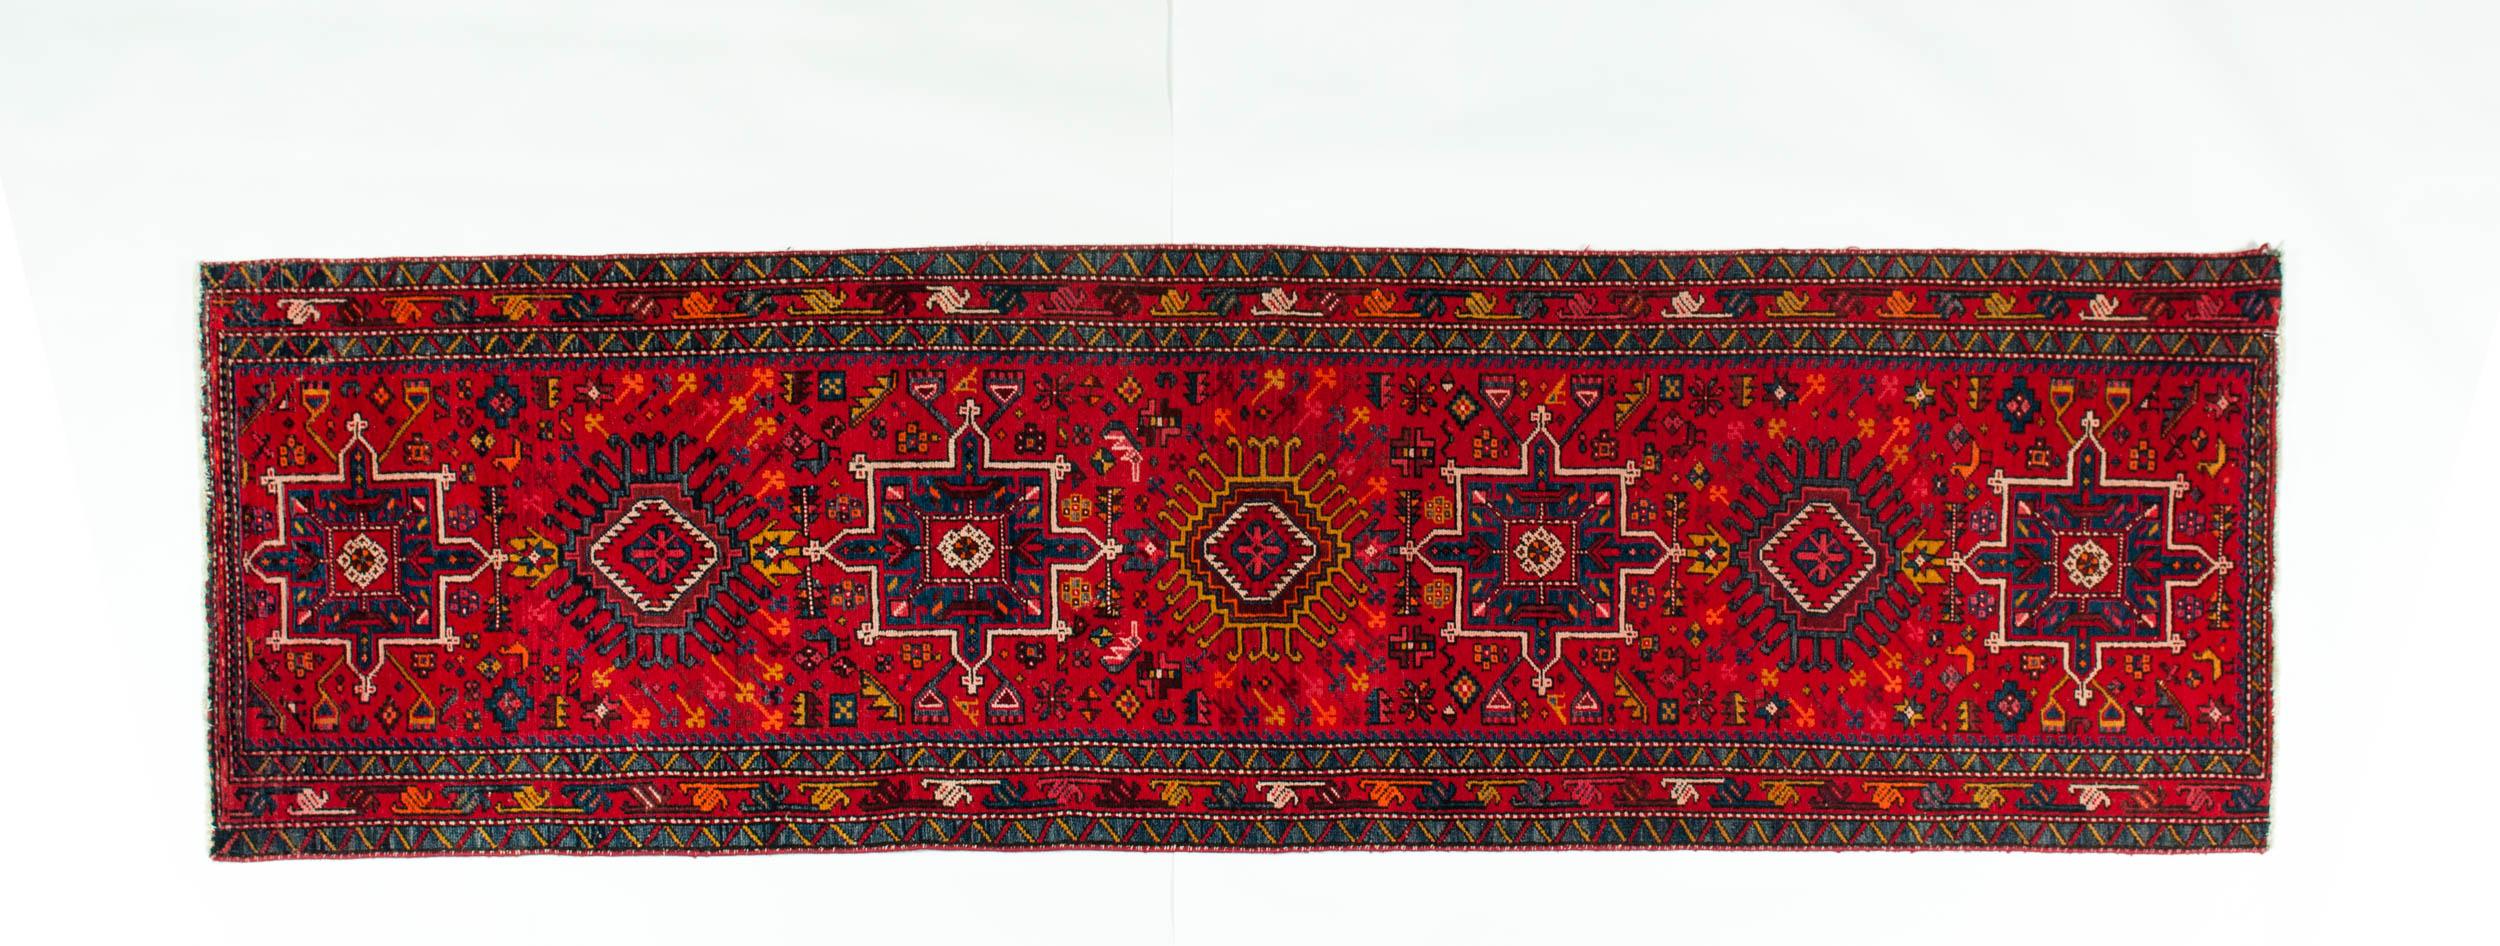 Vintage hand knotted Persian wool hallway runner / area rug. The runner is in great vintage condition and very clean. Minor wear consistent with age / use. The rug measure about 36 inches wide X 124 inches long .